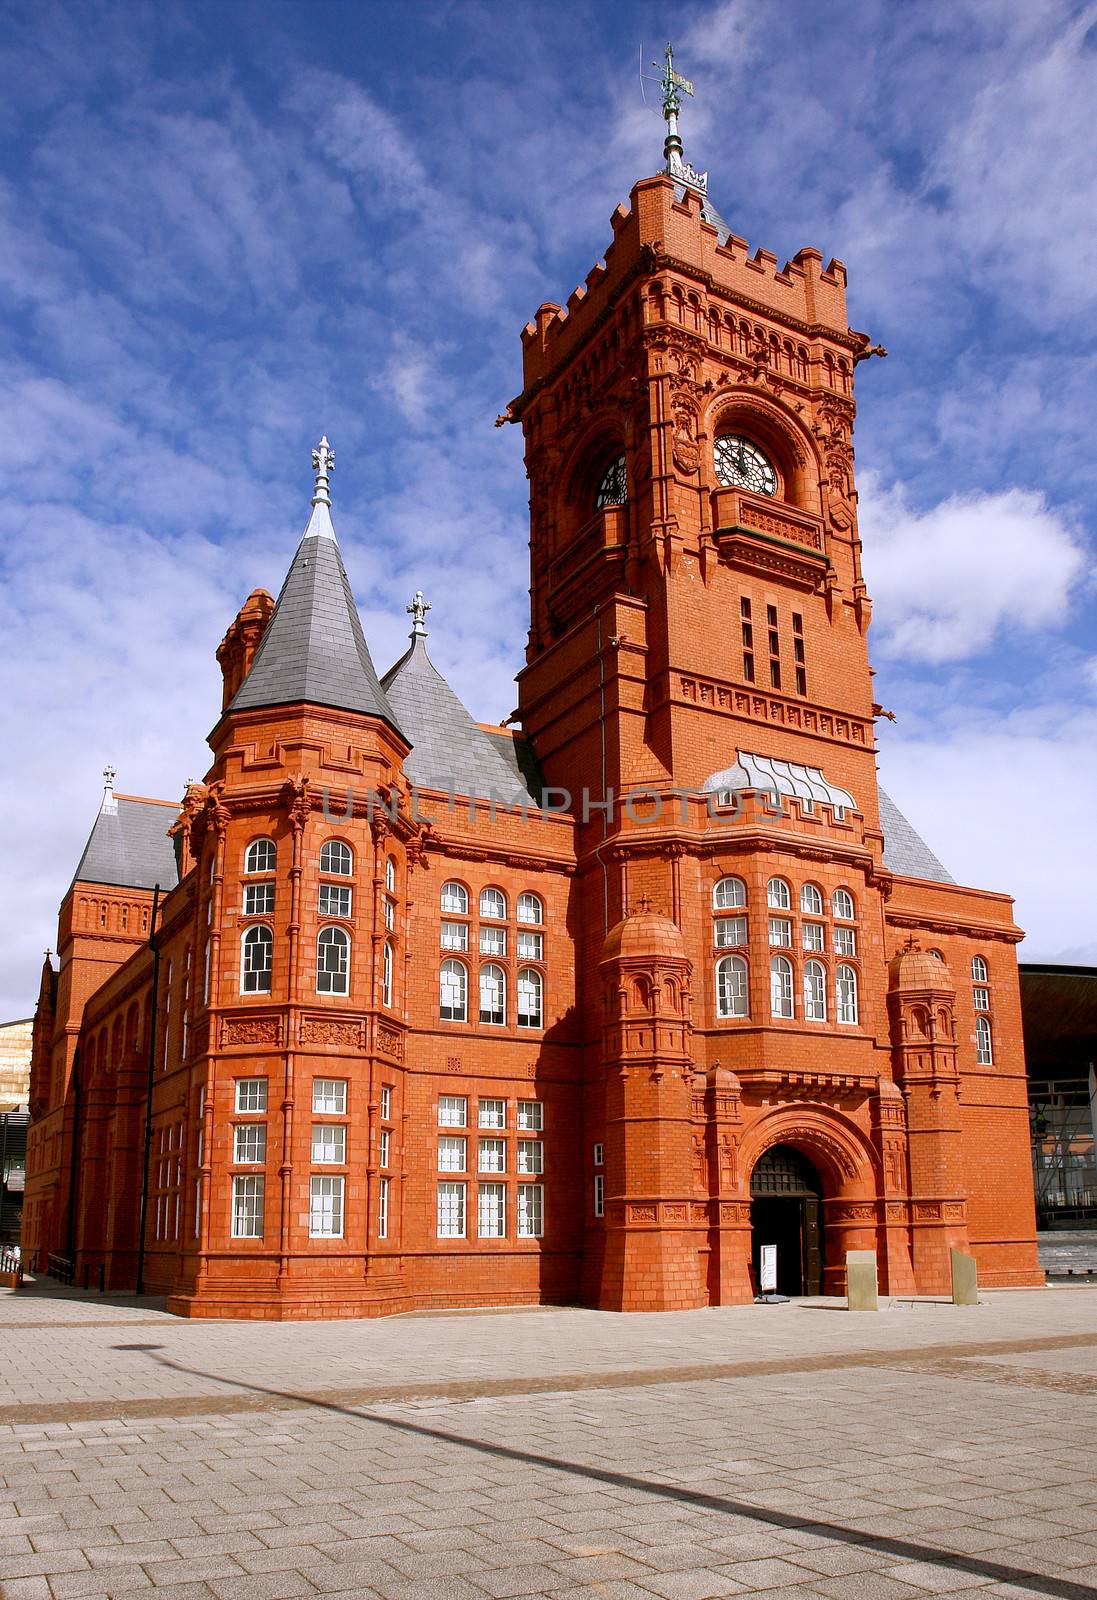 Historical train station museum in Cardiff bay (Wales)  by ptxgarfield